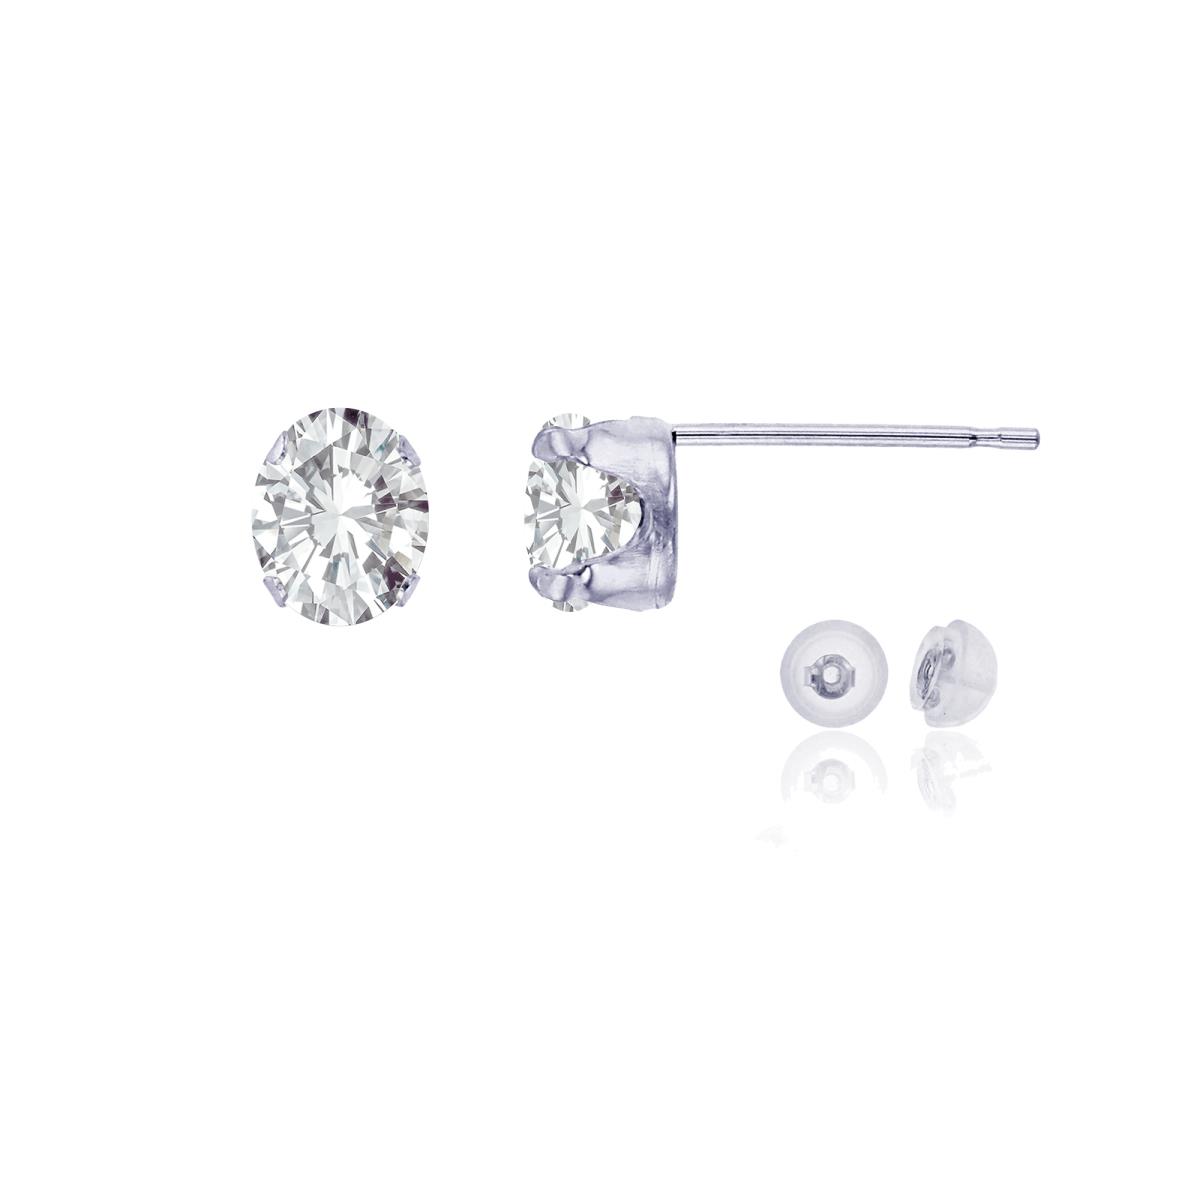 10K White Gold 6x4mm Oval White Topaz Stud Earring with Silicone Back